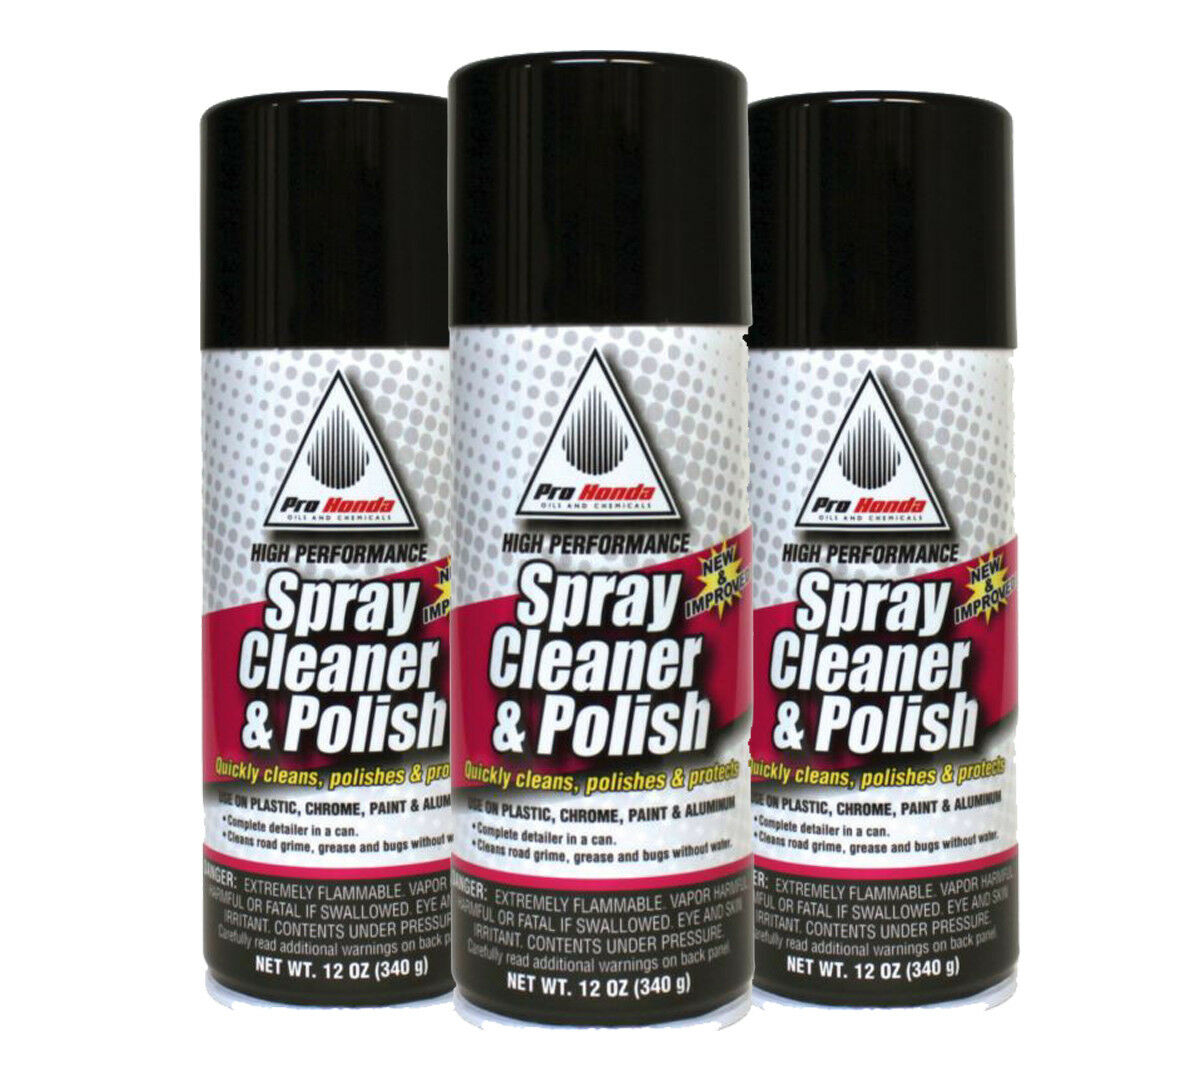 Pro Honda Motorcycle High Performance Spray Cleaner & Polish 3 Cans 12 Oz